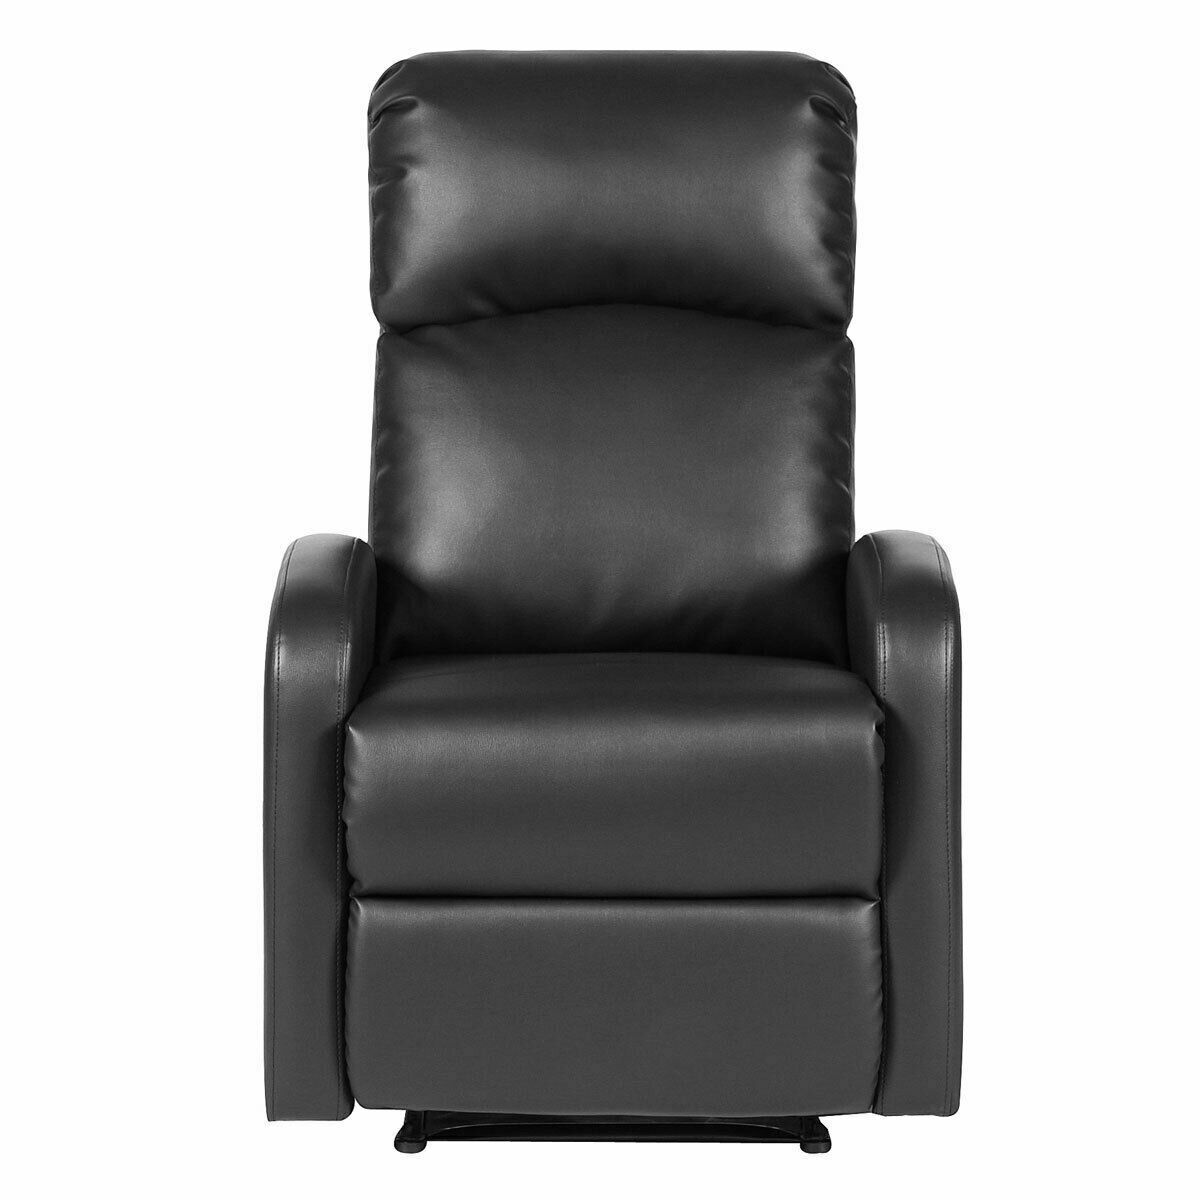 EVRE lounge recliner chair